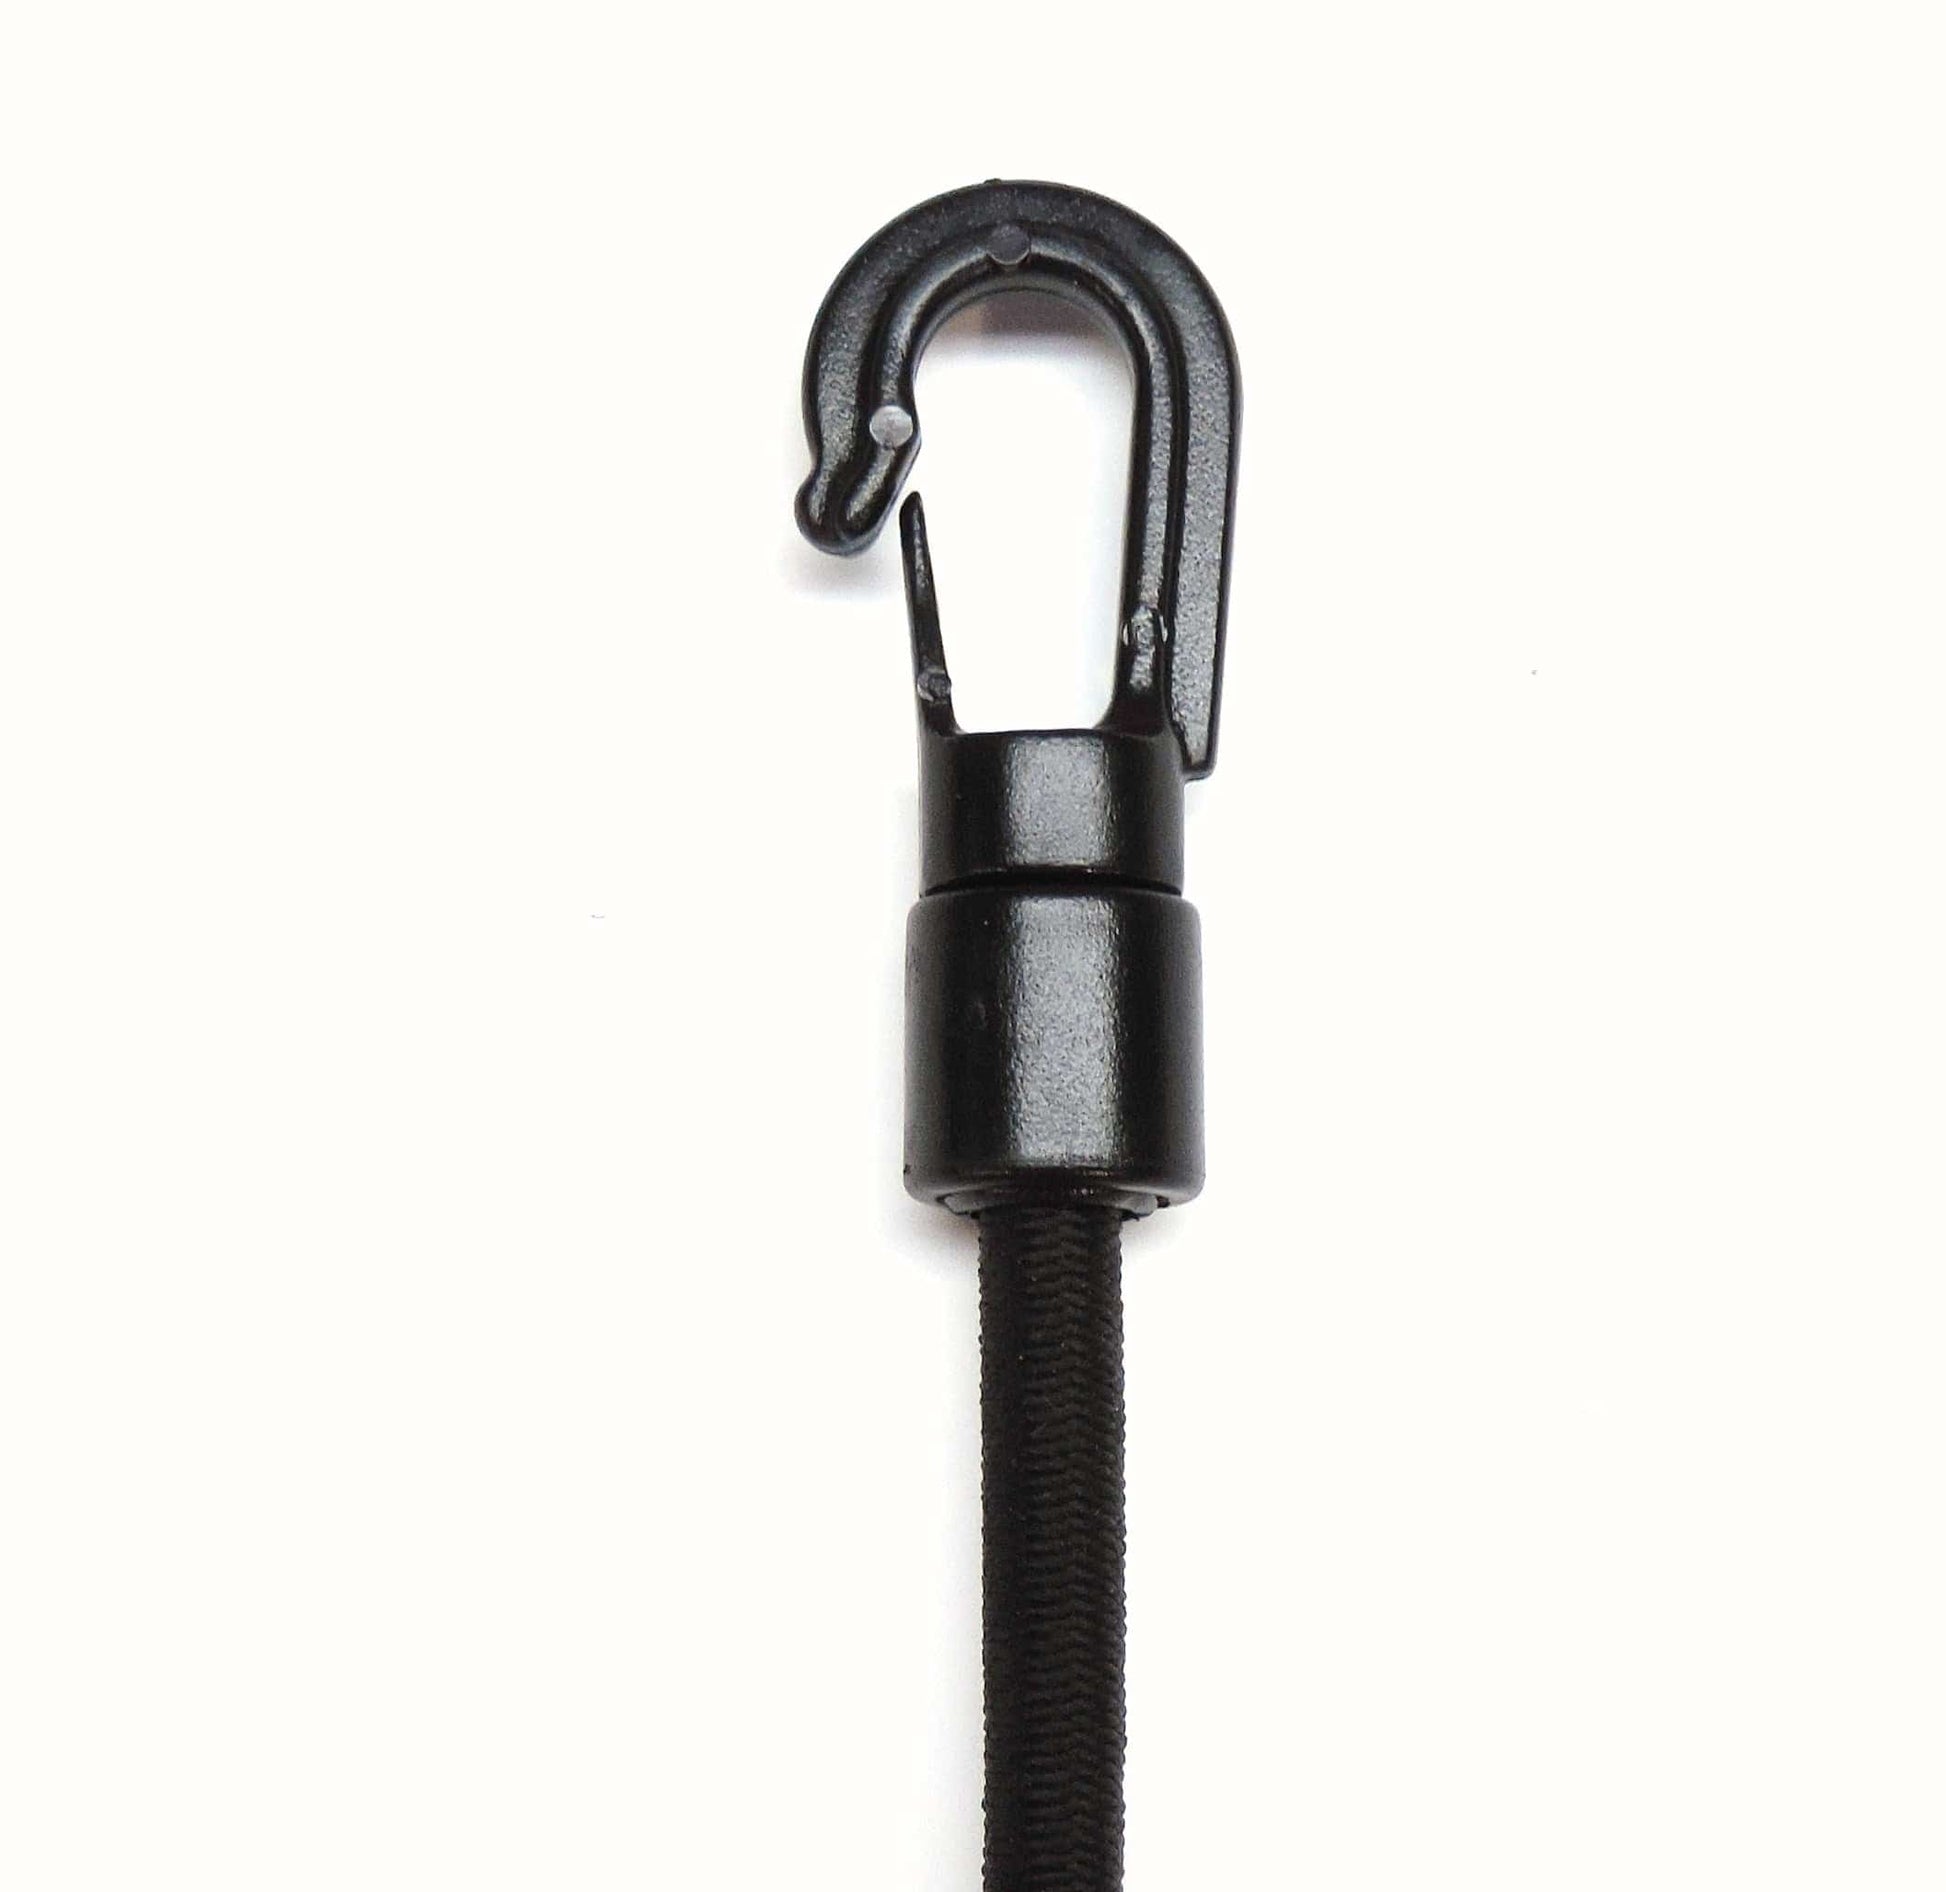 Bungee Cord Hook Pack Small- for 1/4 inch and 3/16 inch Bungee or